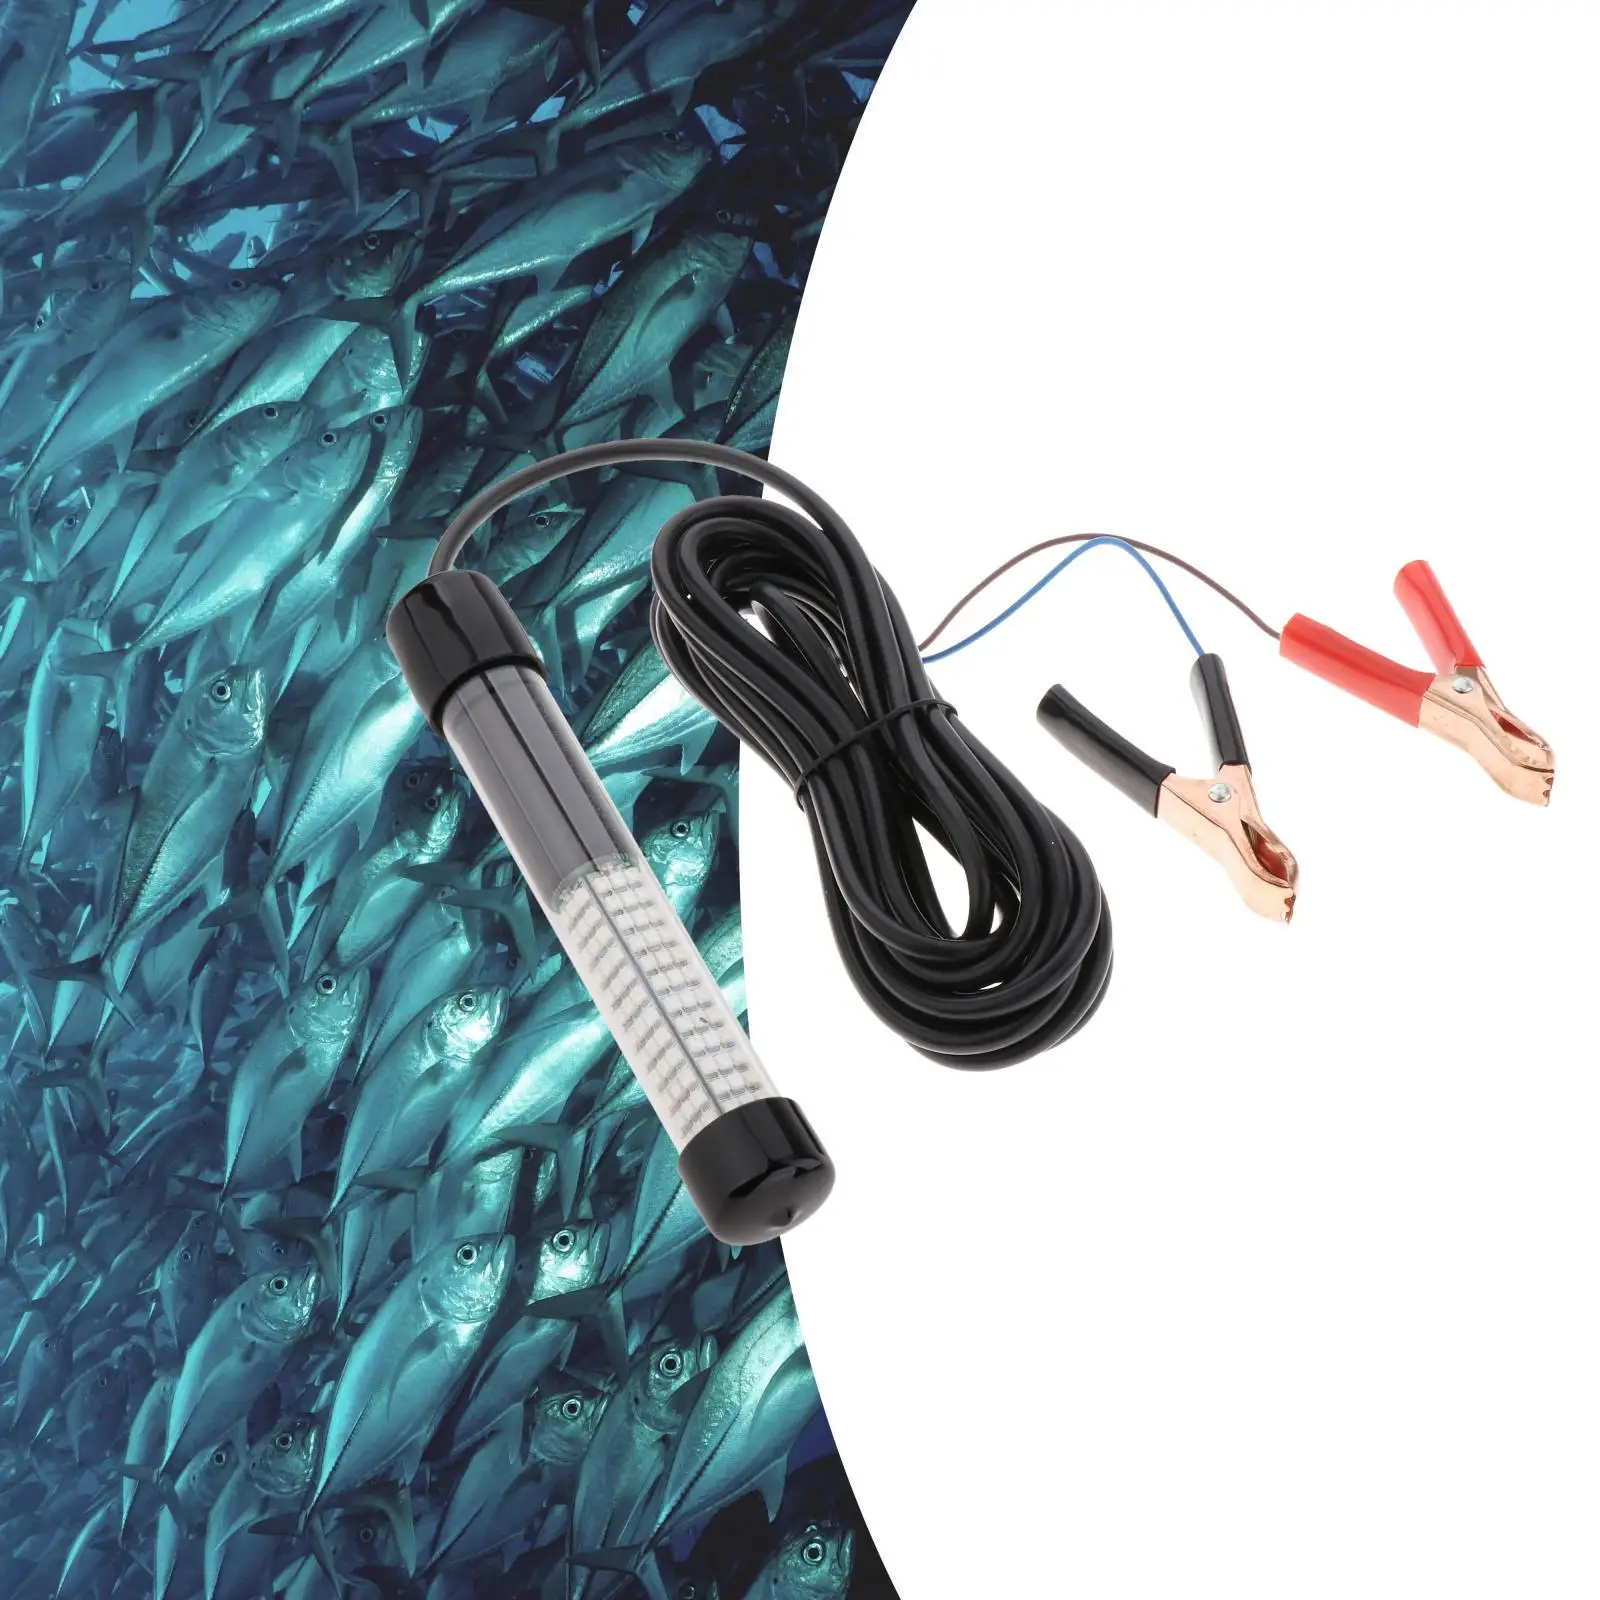 Submersible Fishing Light 5M Cable Portable Night Fishing Finder Underwater Fishing Light for Freshwater Saltwater Sea Fishing